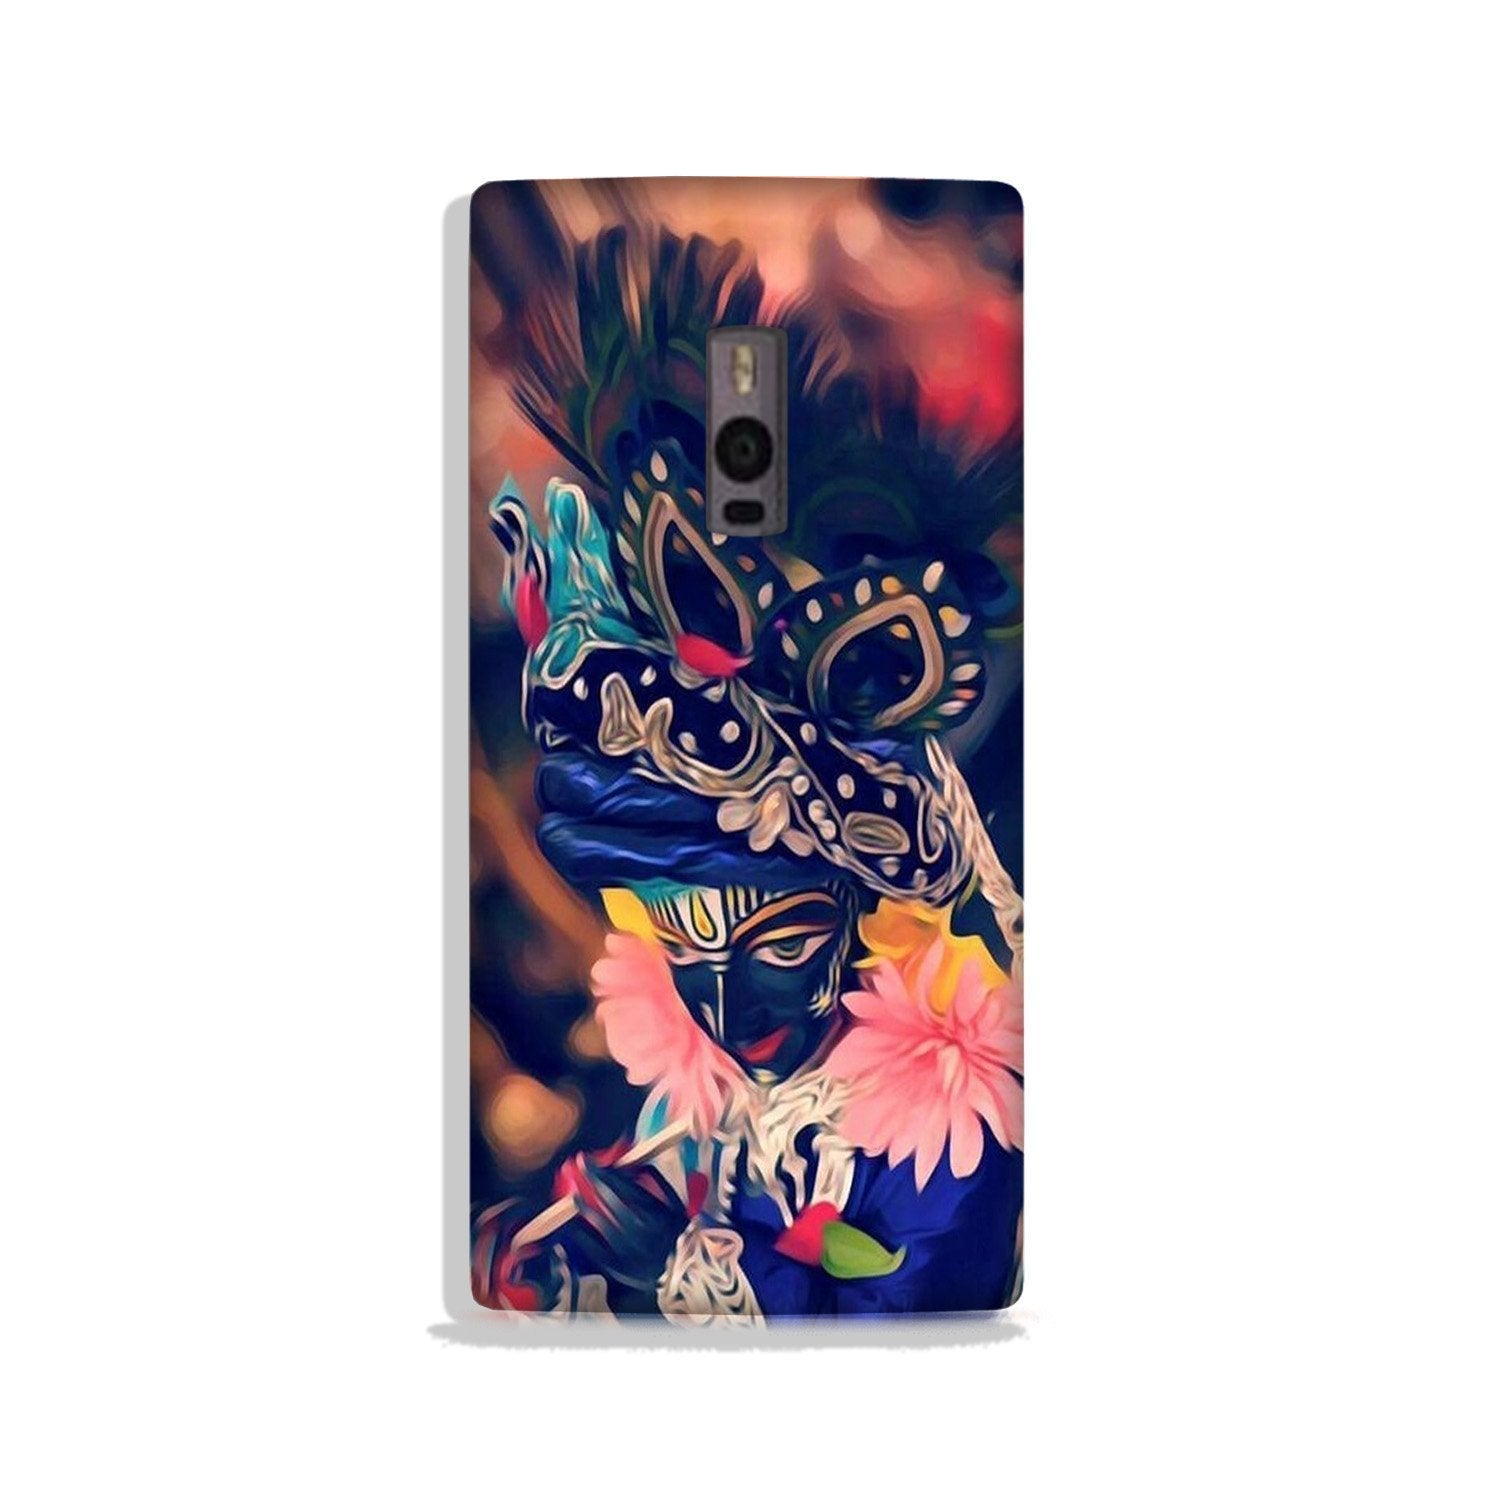 Lord Krishna Case for OnePlus 2